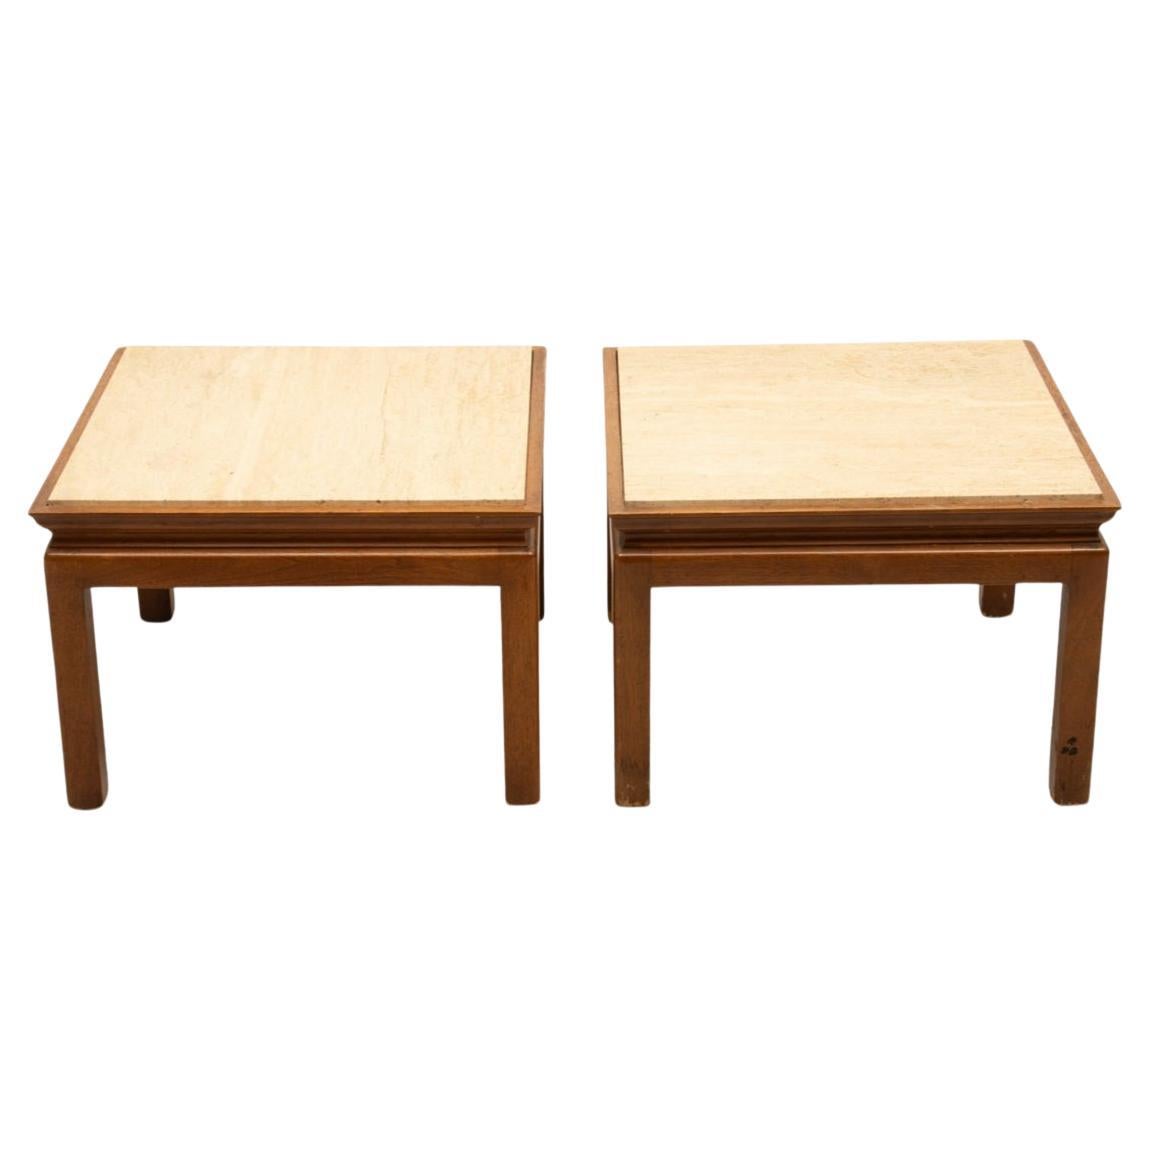 Pair of Mid Century Modern travertine end Tables by Widdicomb For Sale